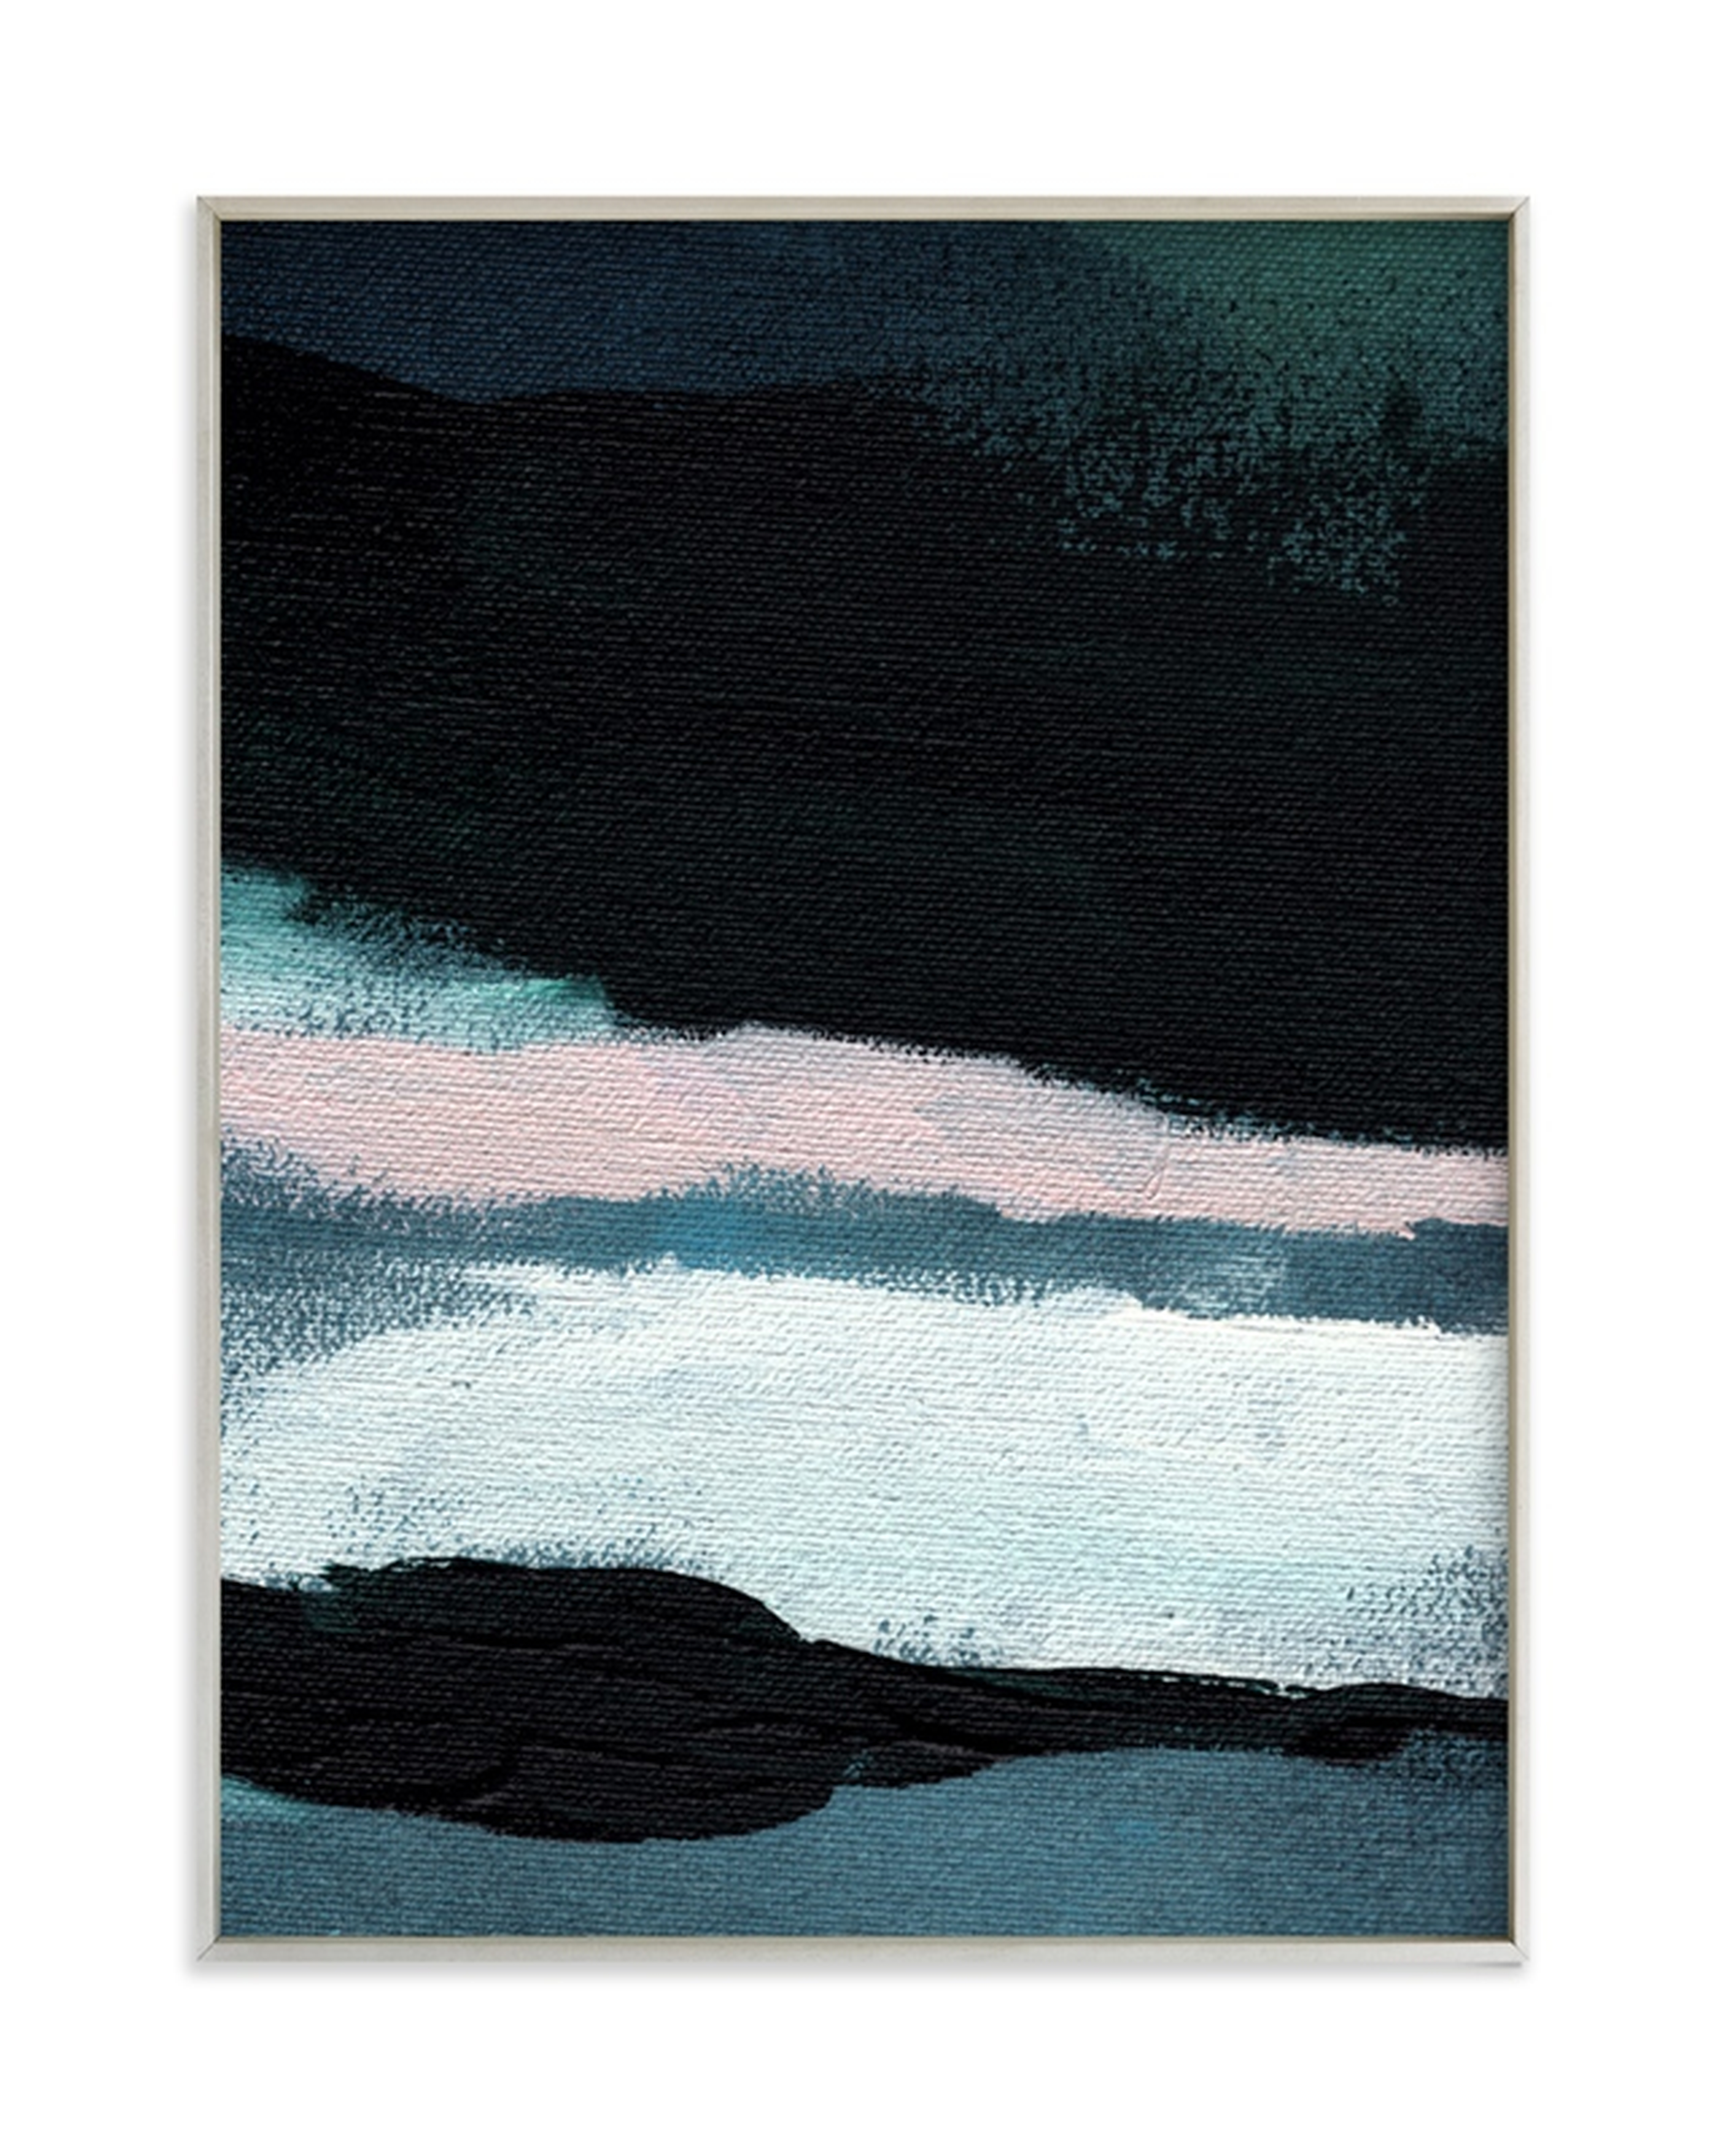 Into The Mist II  - 18" x 24" - Champagne Silver - Minted